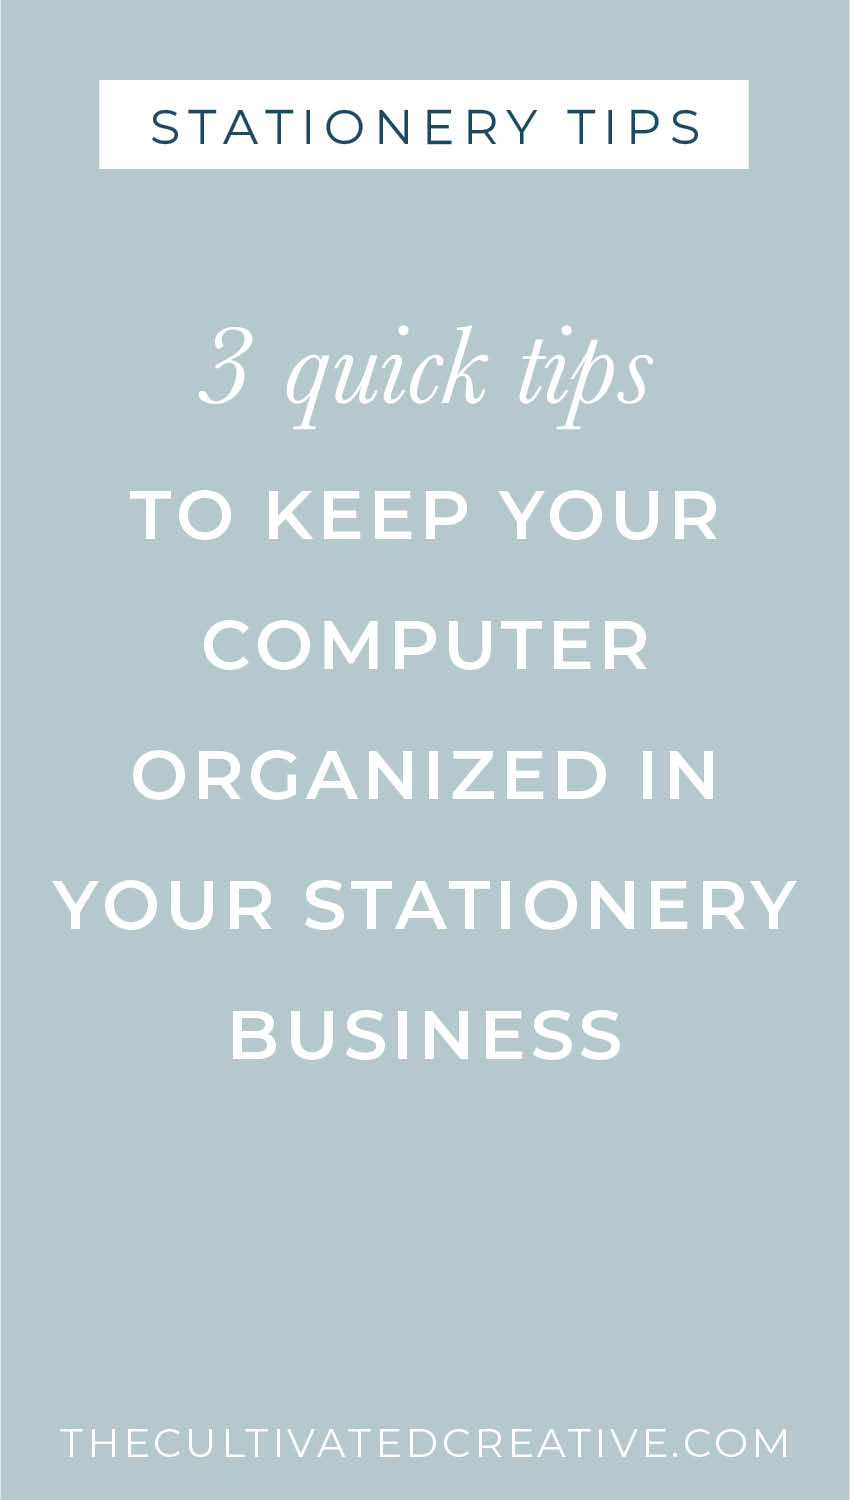 3 quick tips to keep your computer and files organized for your stationery business